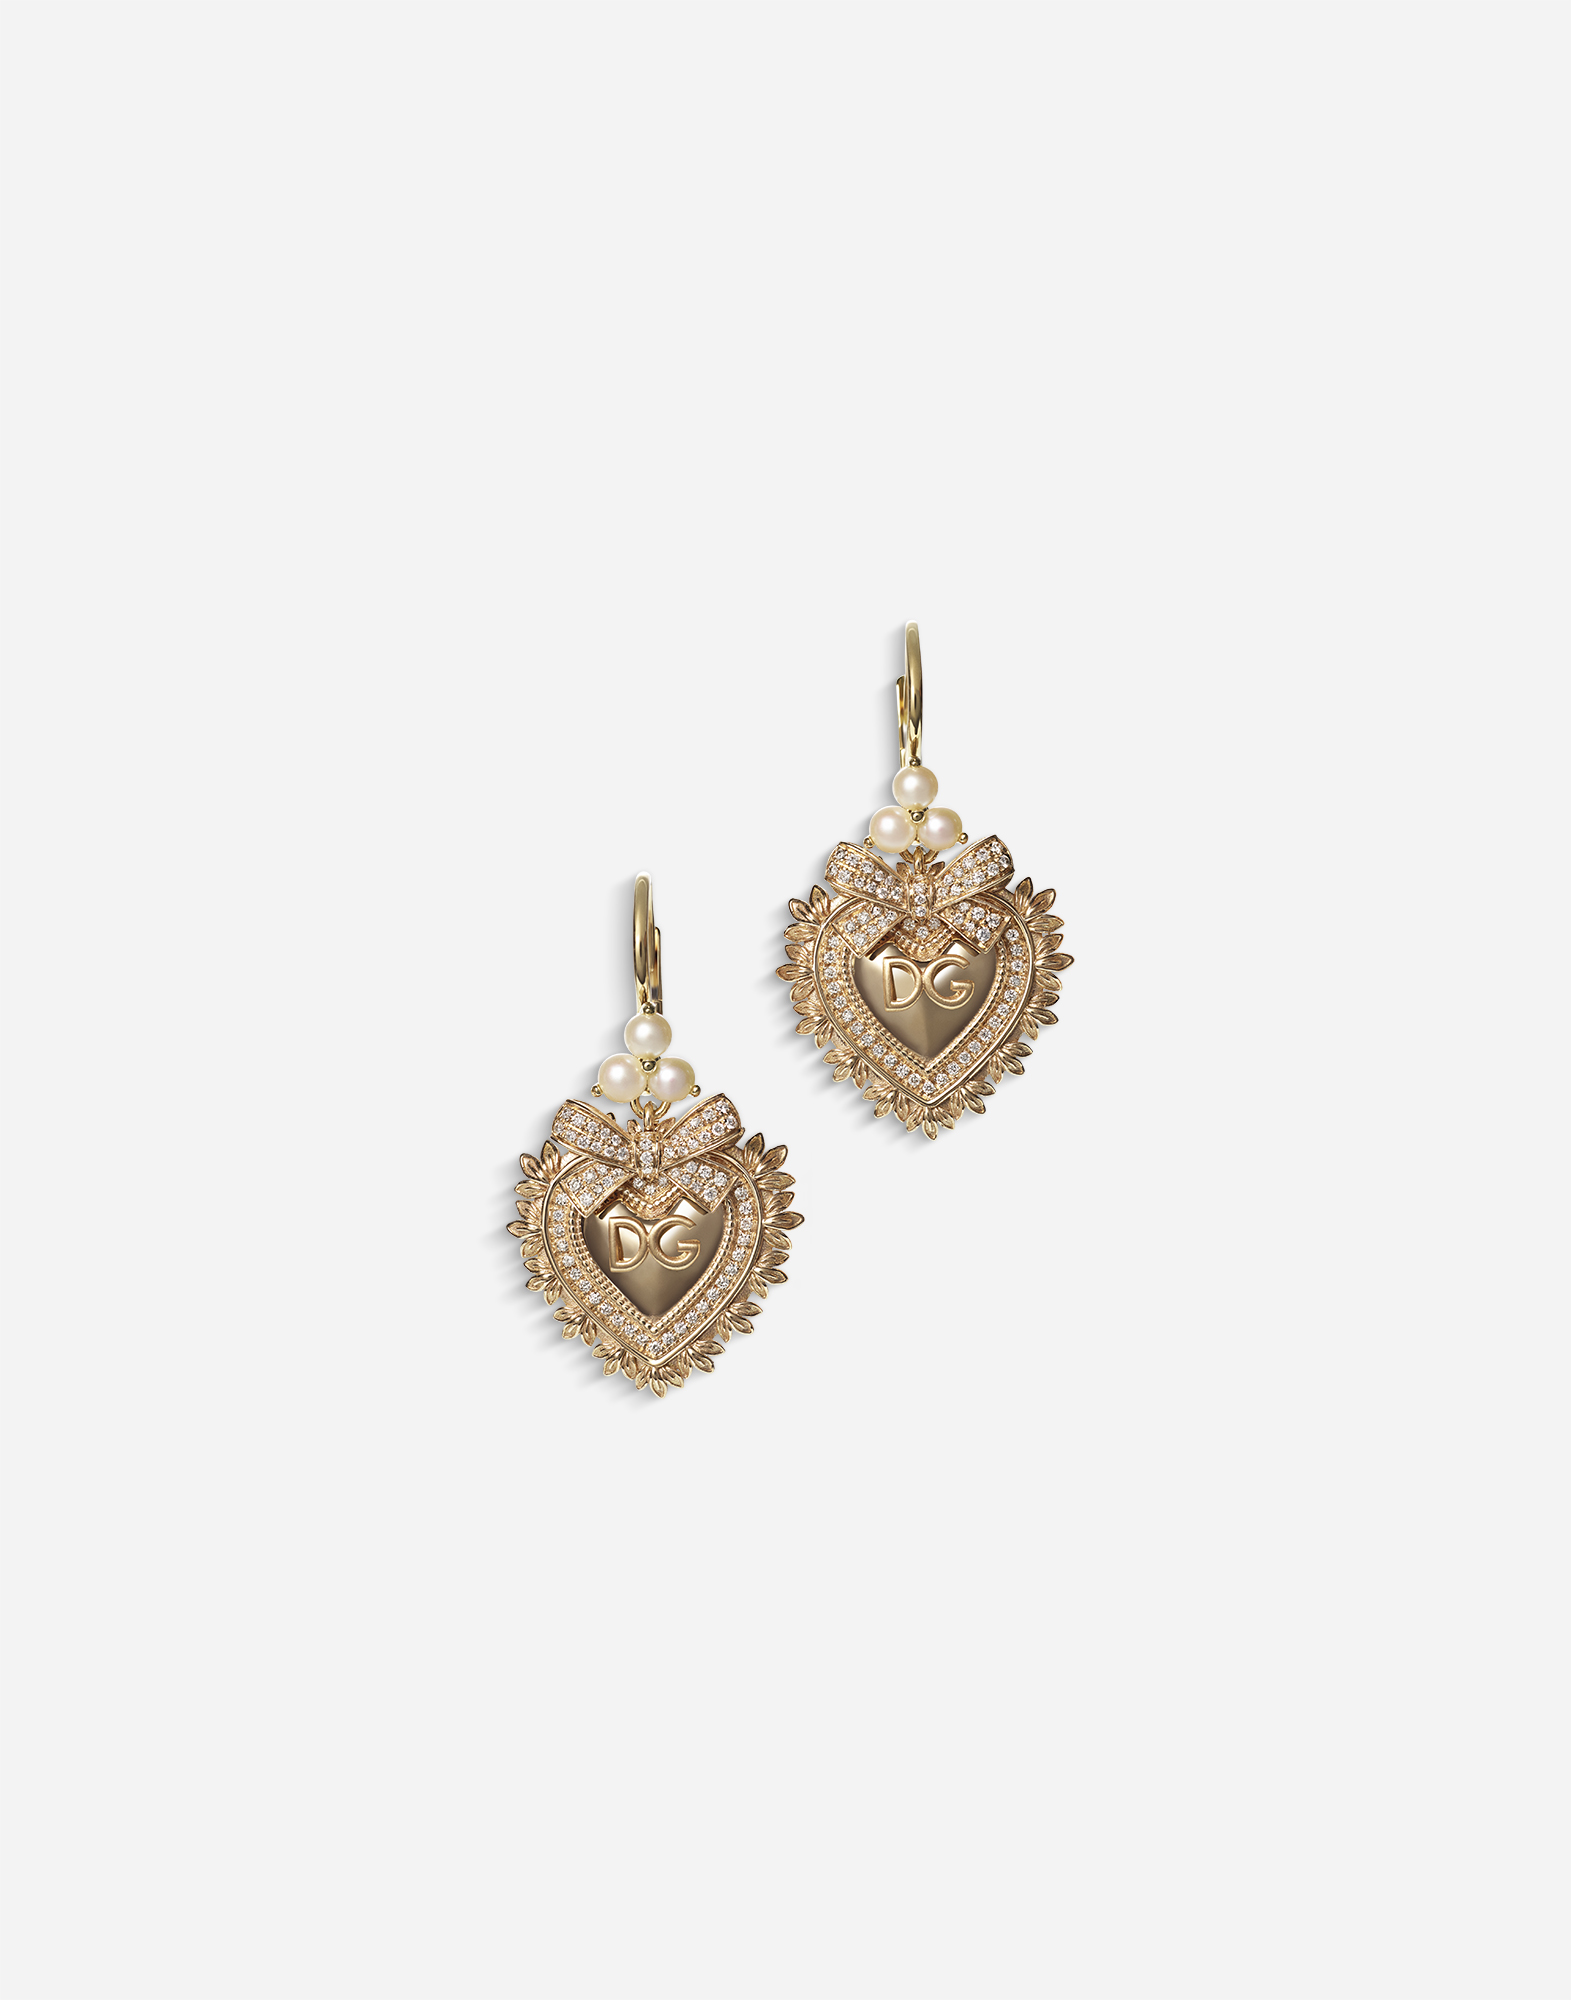 Dolce & Gabbana Devotion Earrings In Yellow Gold With Diamonds And Pearls